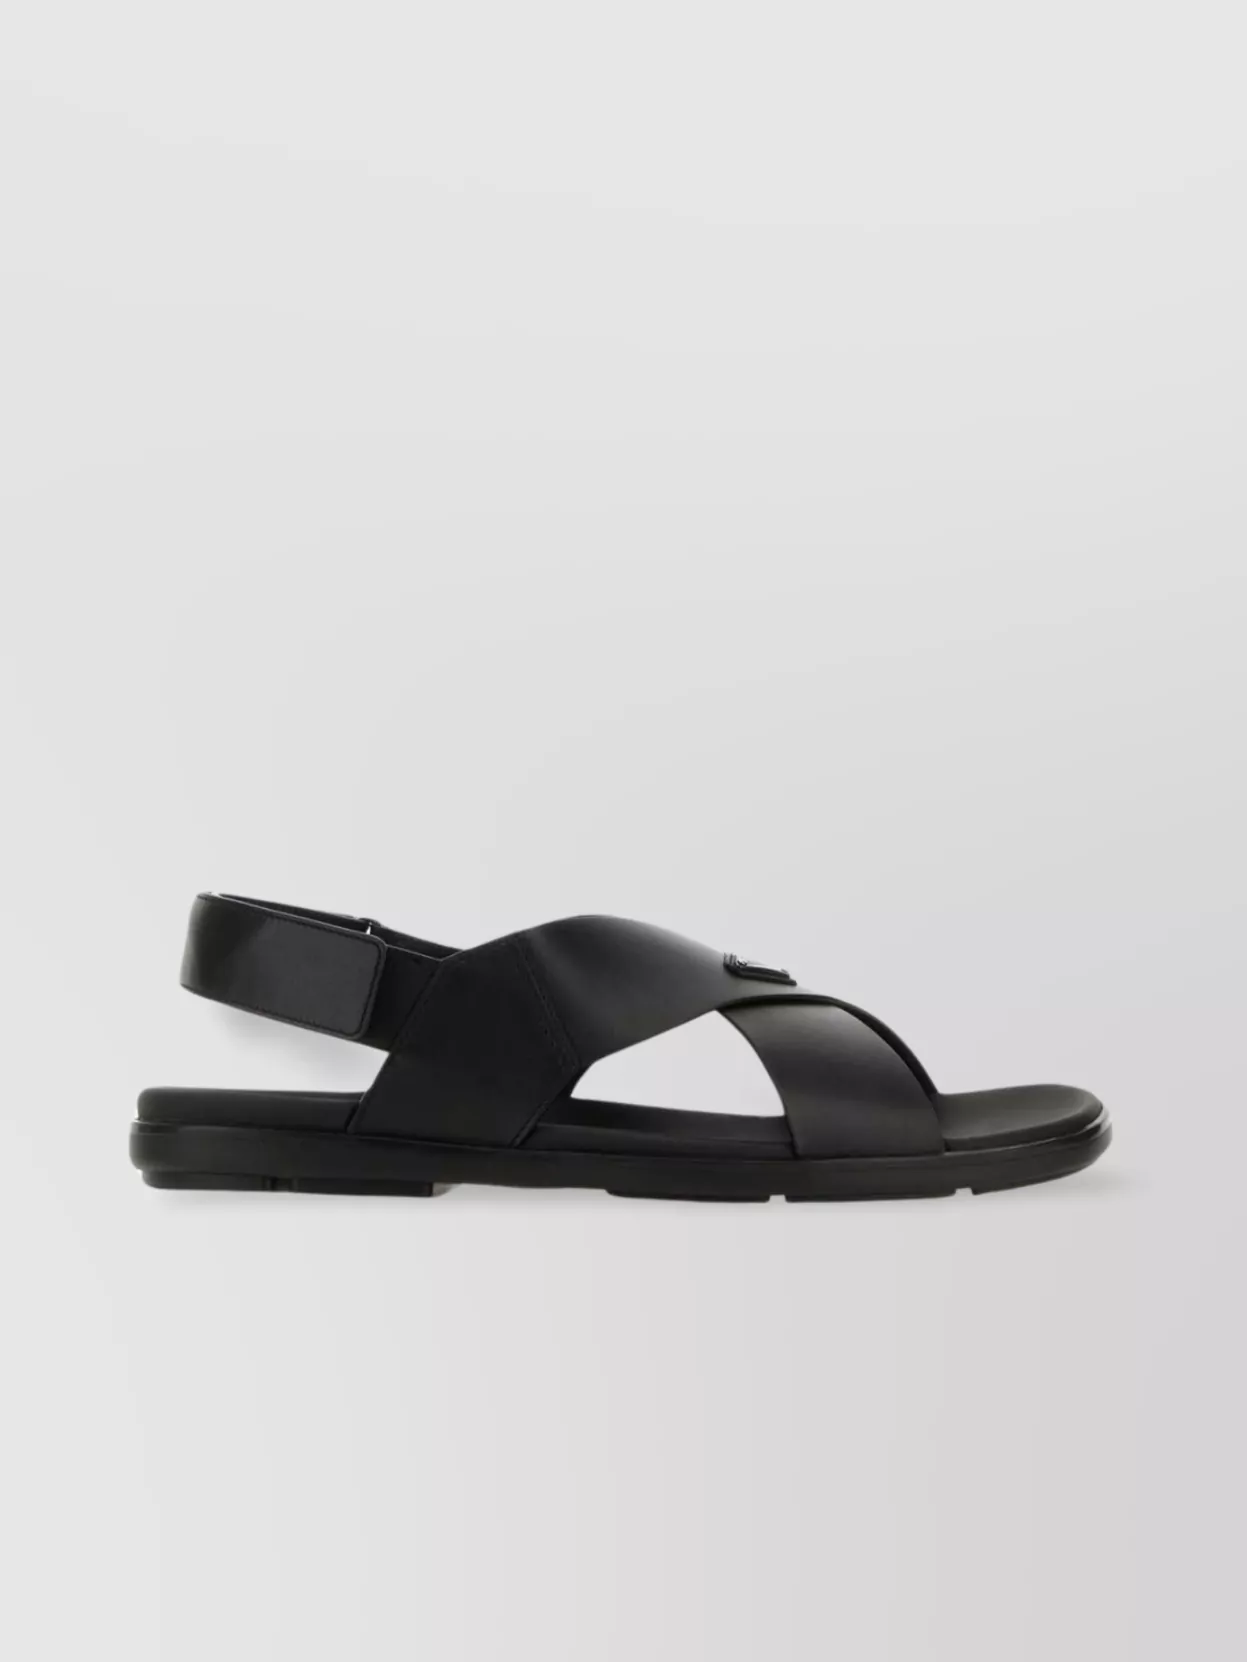 PRADA LEATHER SANDALS WITH FLAT SOLE AND CROSS-STRAP DESIGN